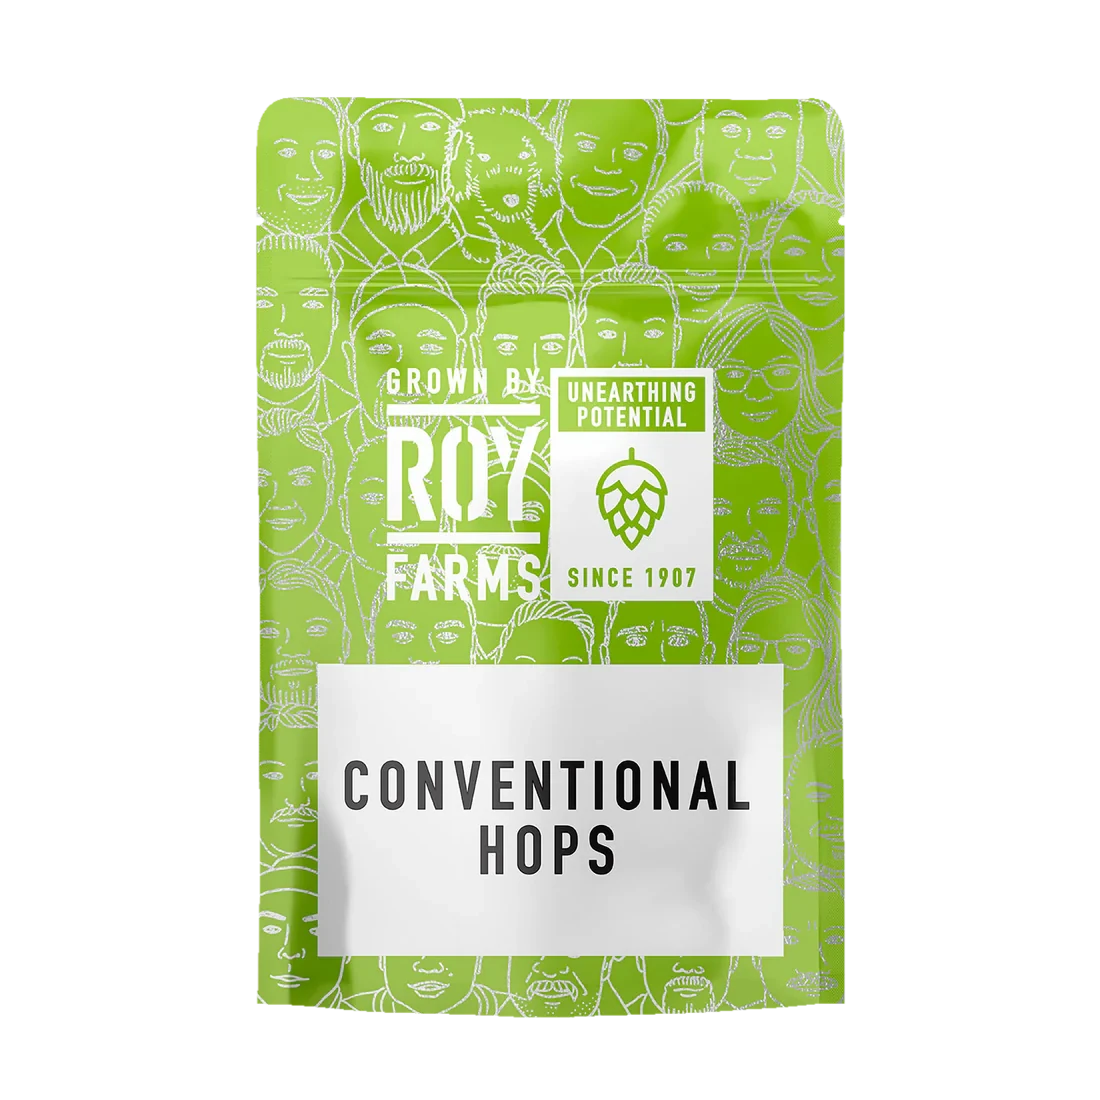 Conventional Hops